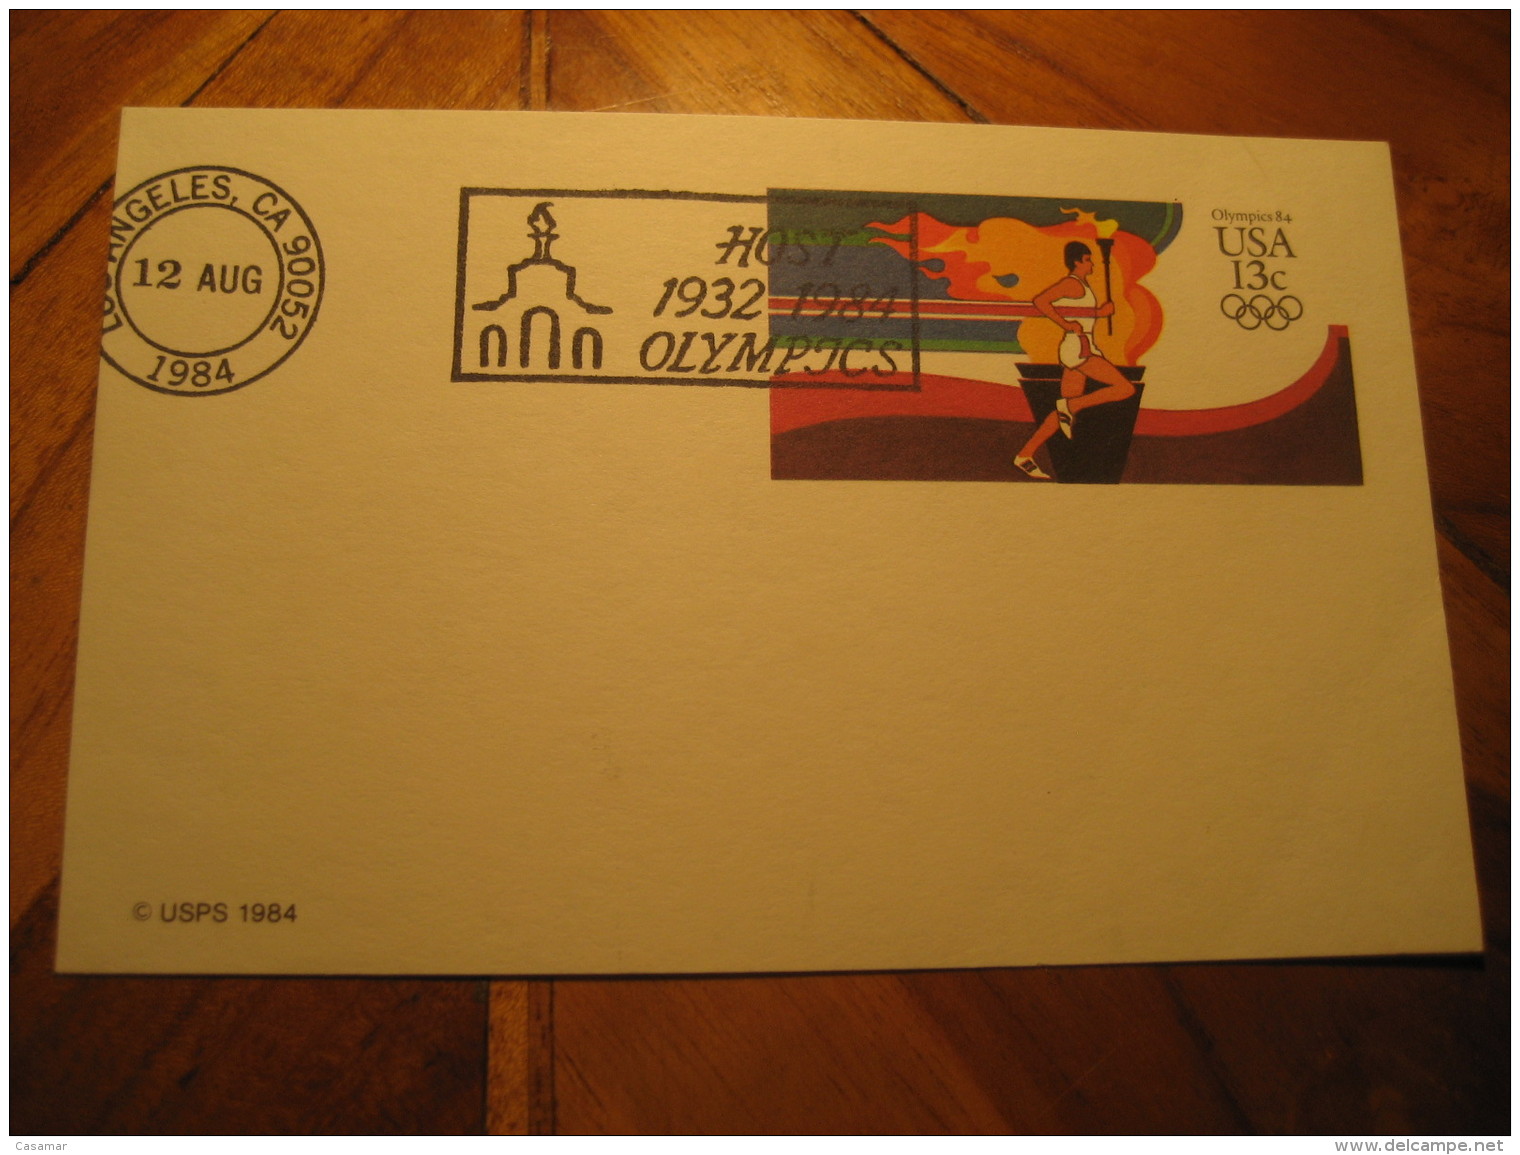 LOS ANGELES 1932 Olympic Games Olympics 1984 Torch Postal Stationery Card USA - Zomer 1932: Los Angeles